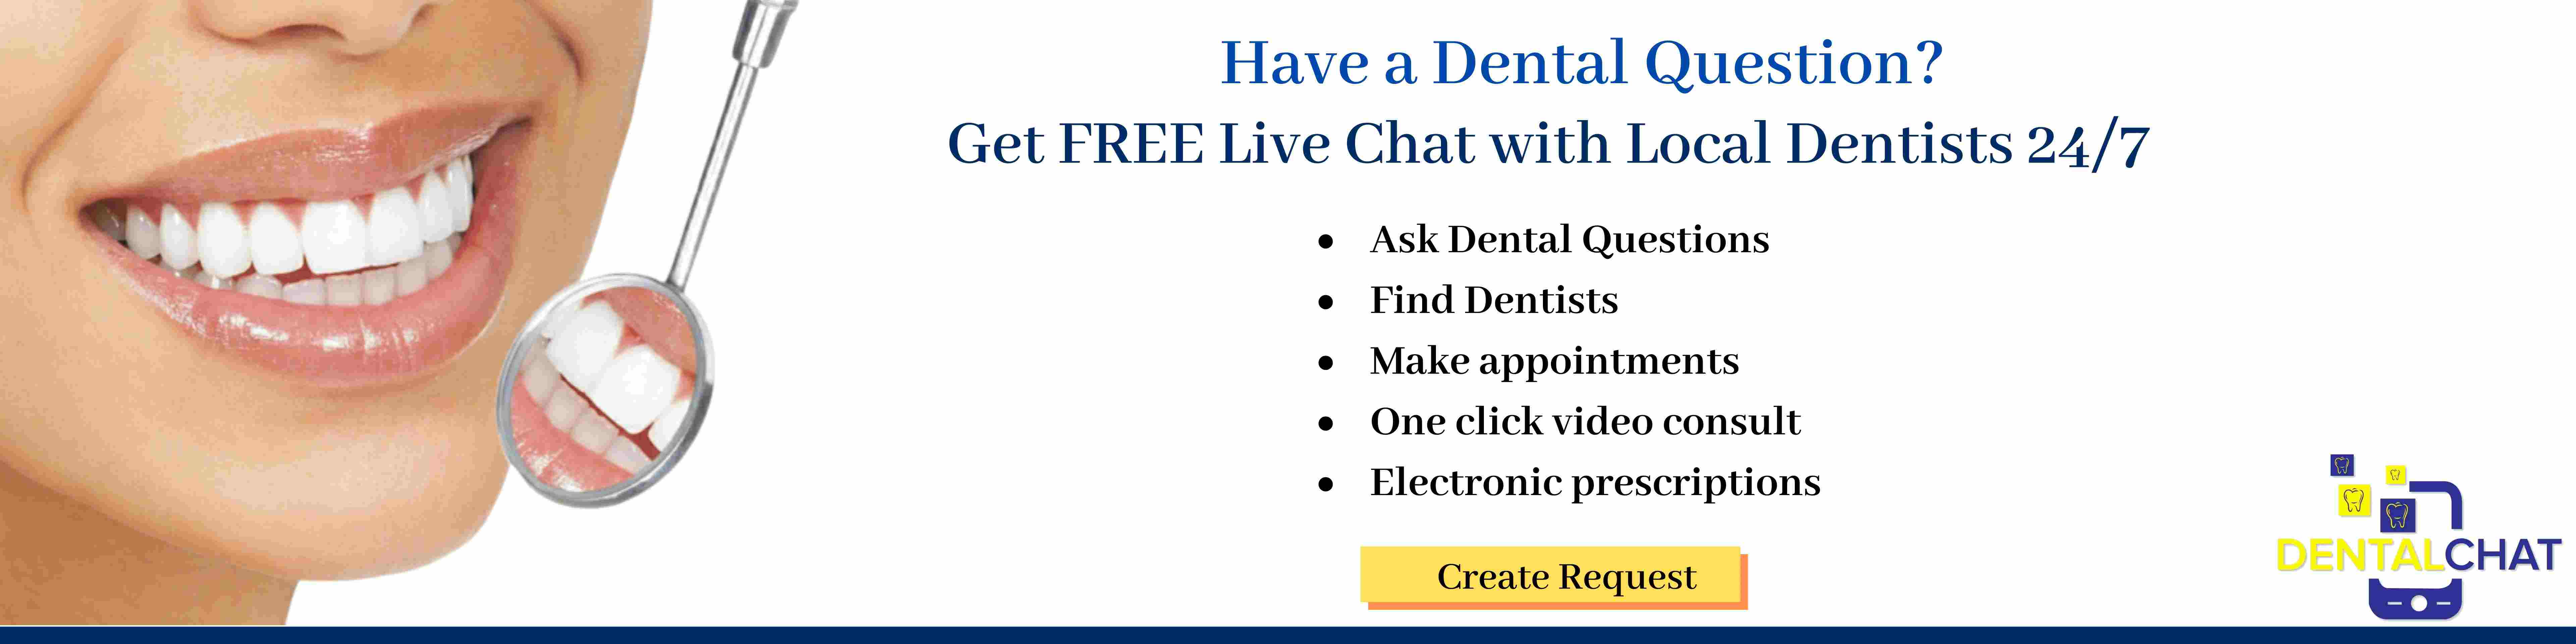 get free dental consult, live teledentistry service, local dental IQ questions